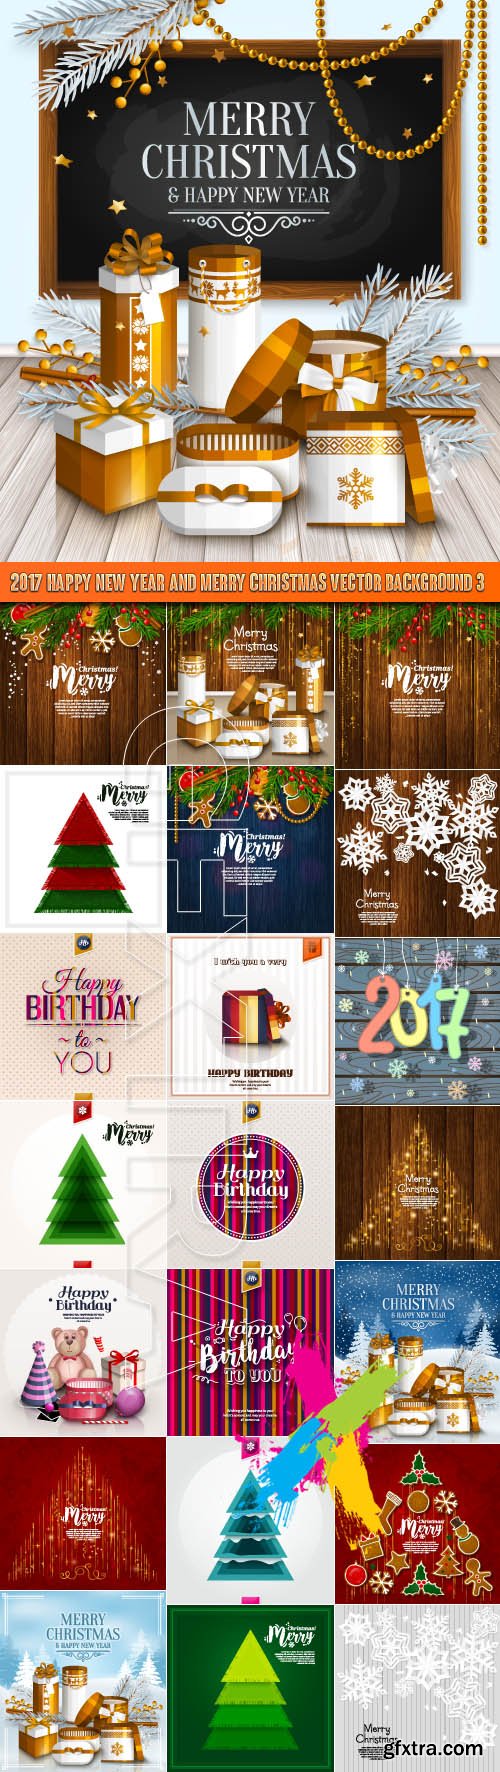 2017 Happy New Year and Merry Christmas vector background 3